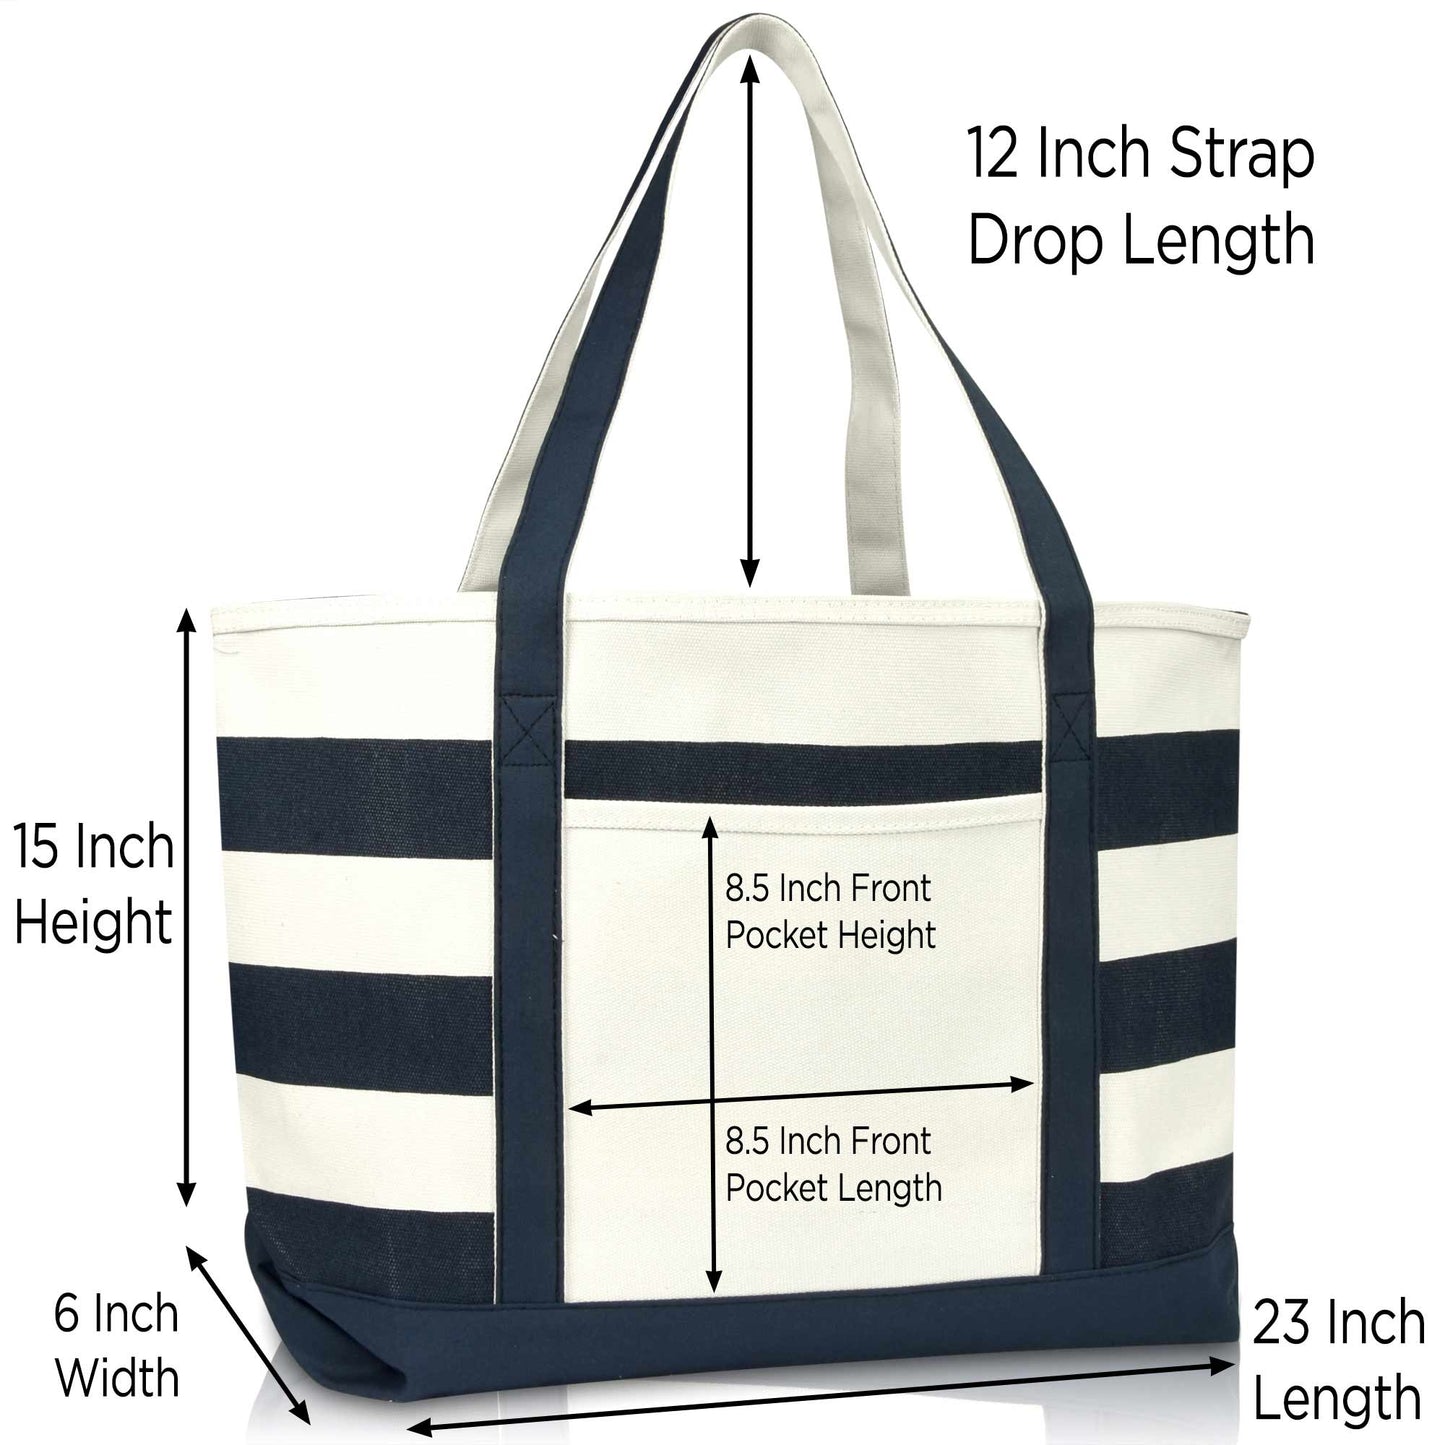 DALIX Anchor With Rope Womens Embroider Striped Cotton Tote